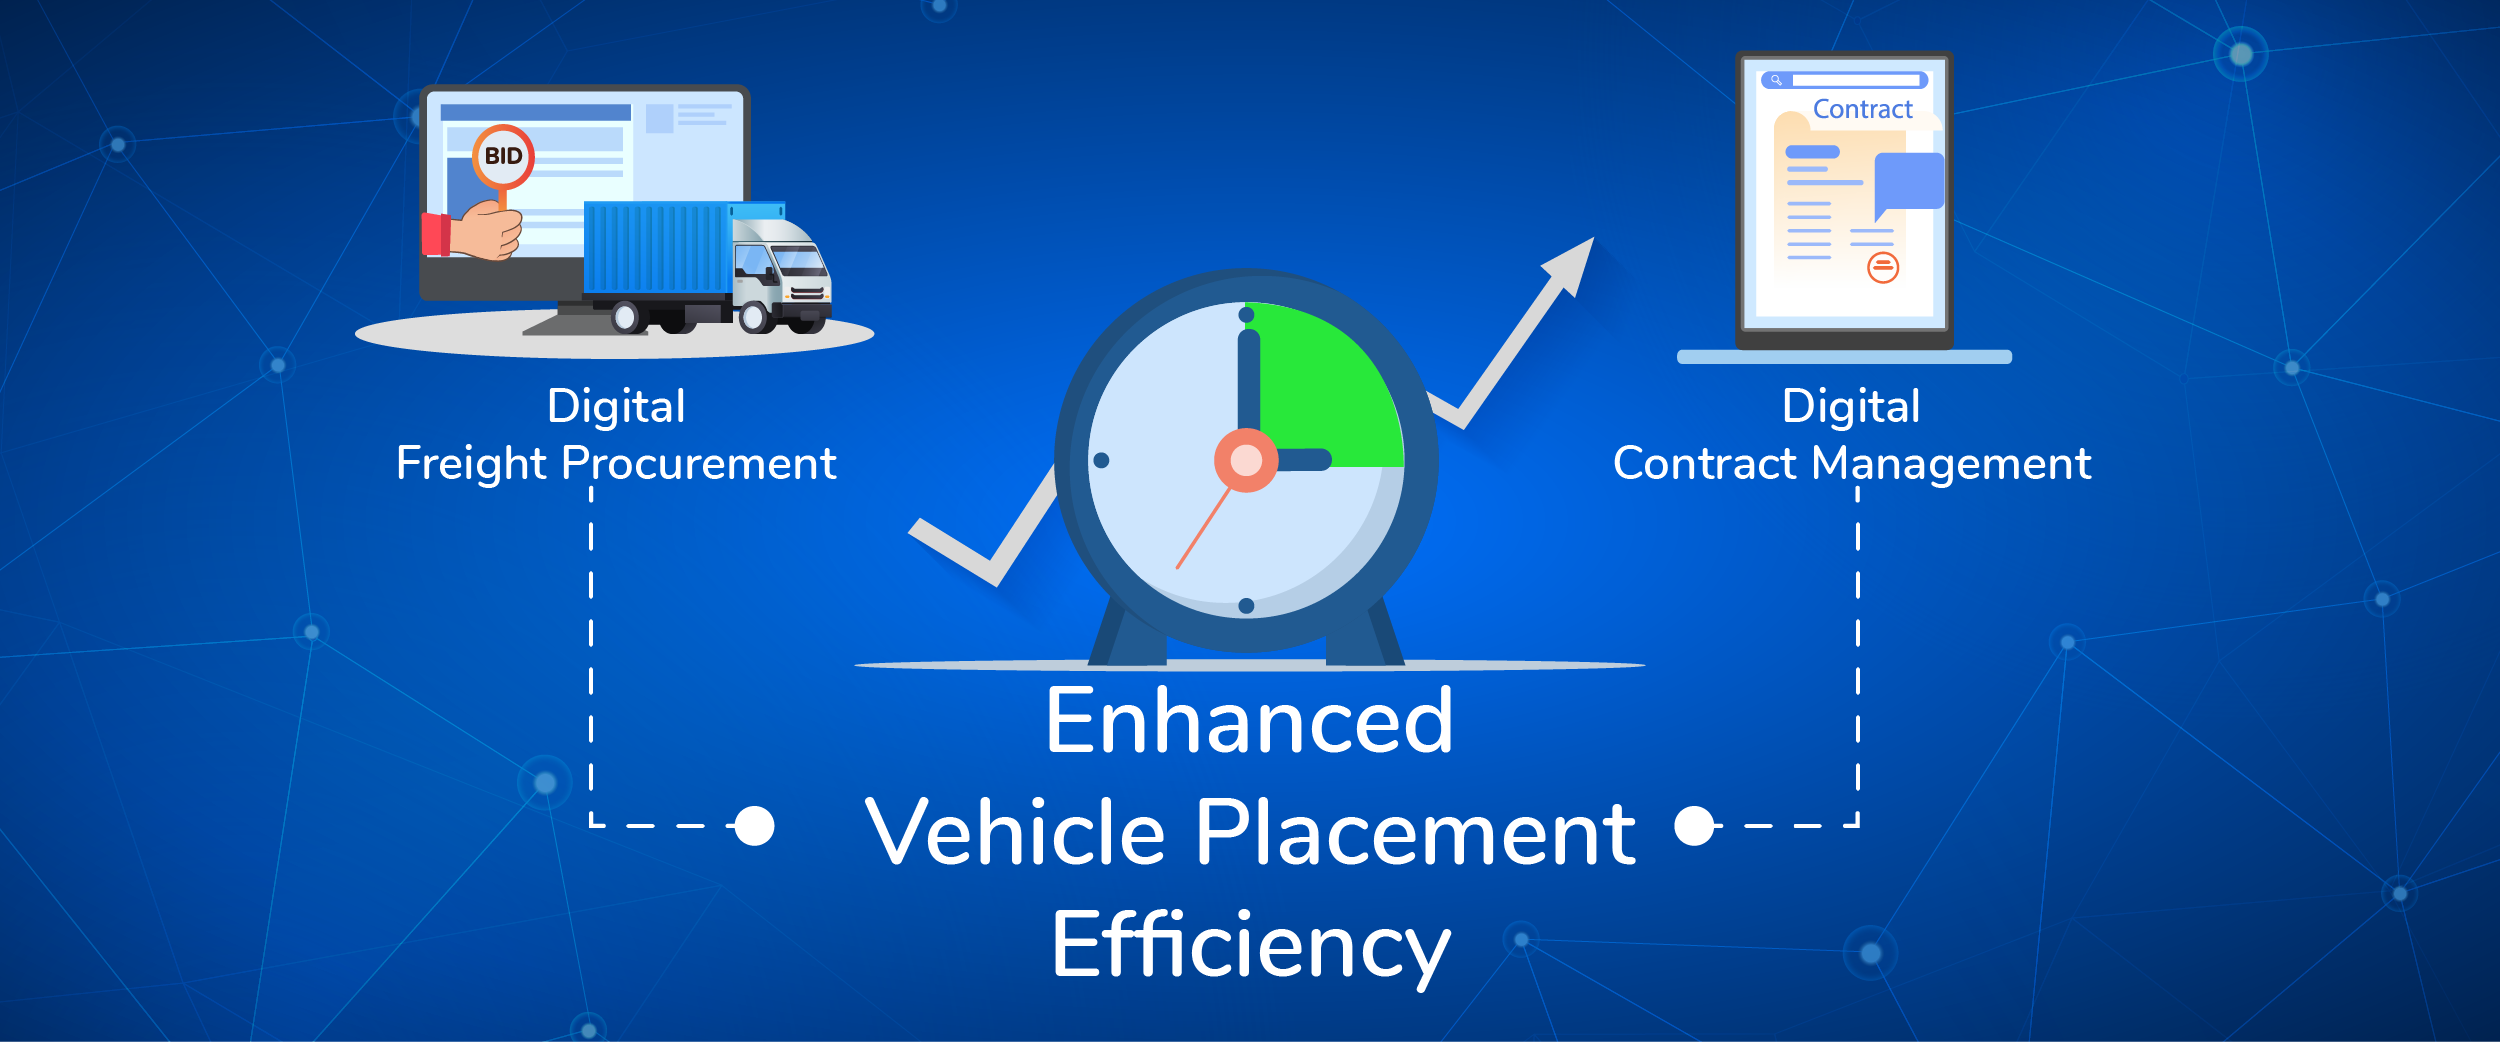 Digitalizing Vehicle Procurement & Contract Management for Improved Placement